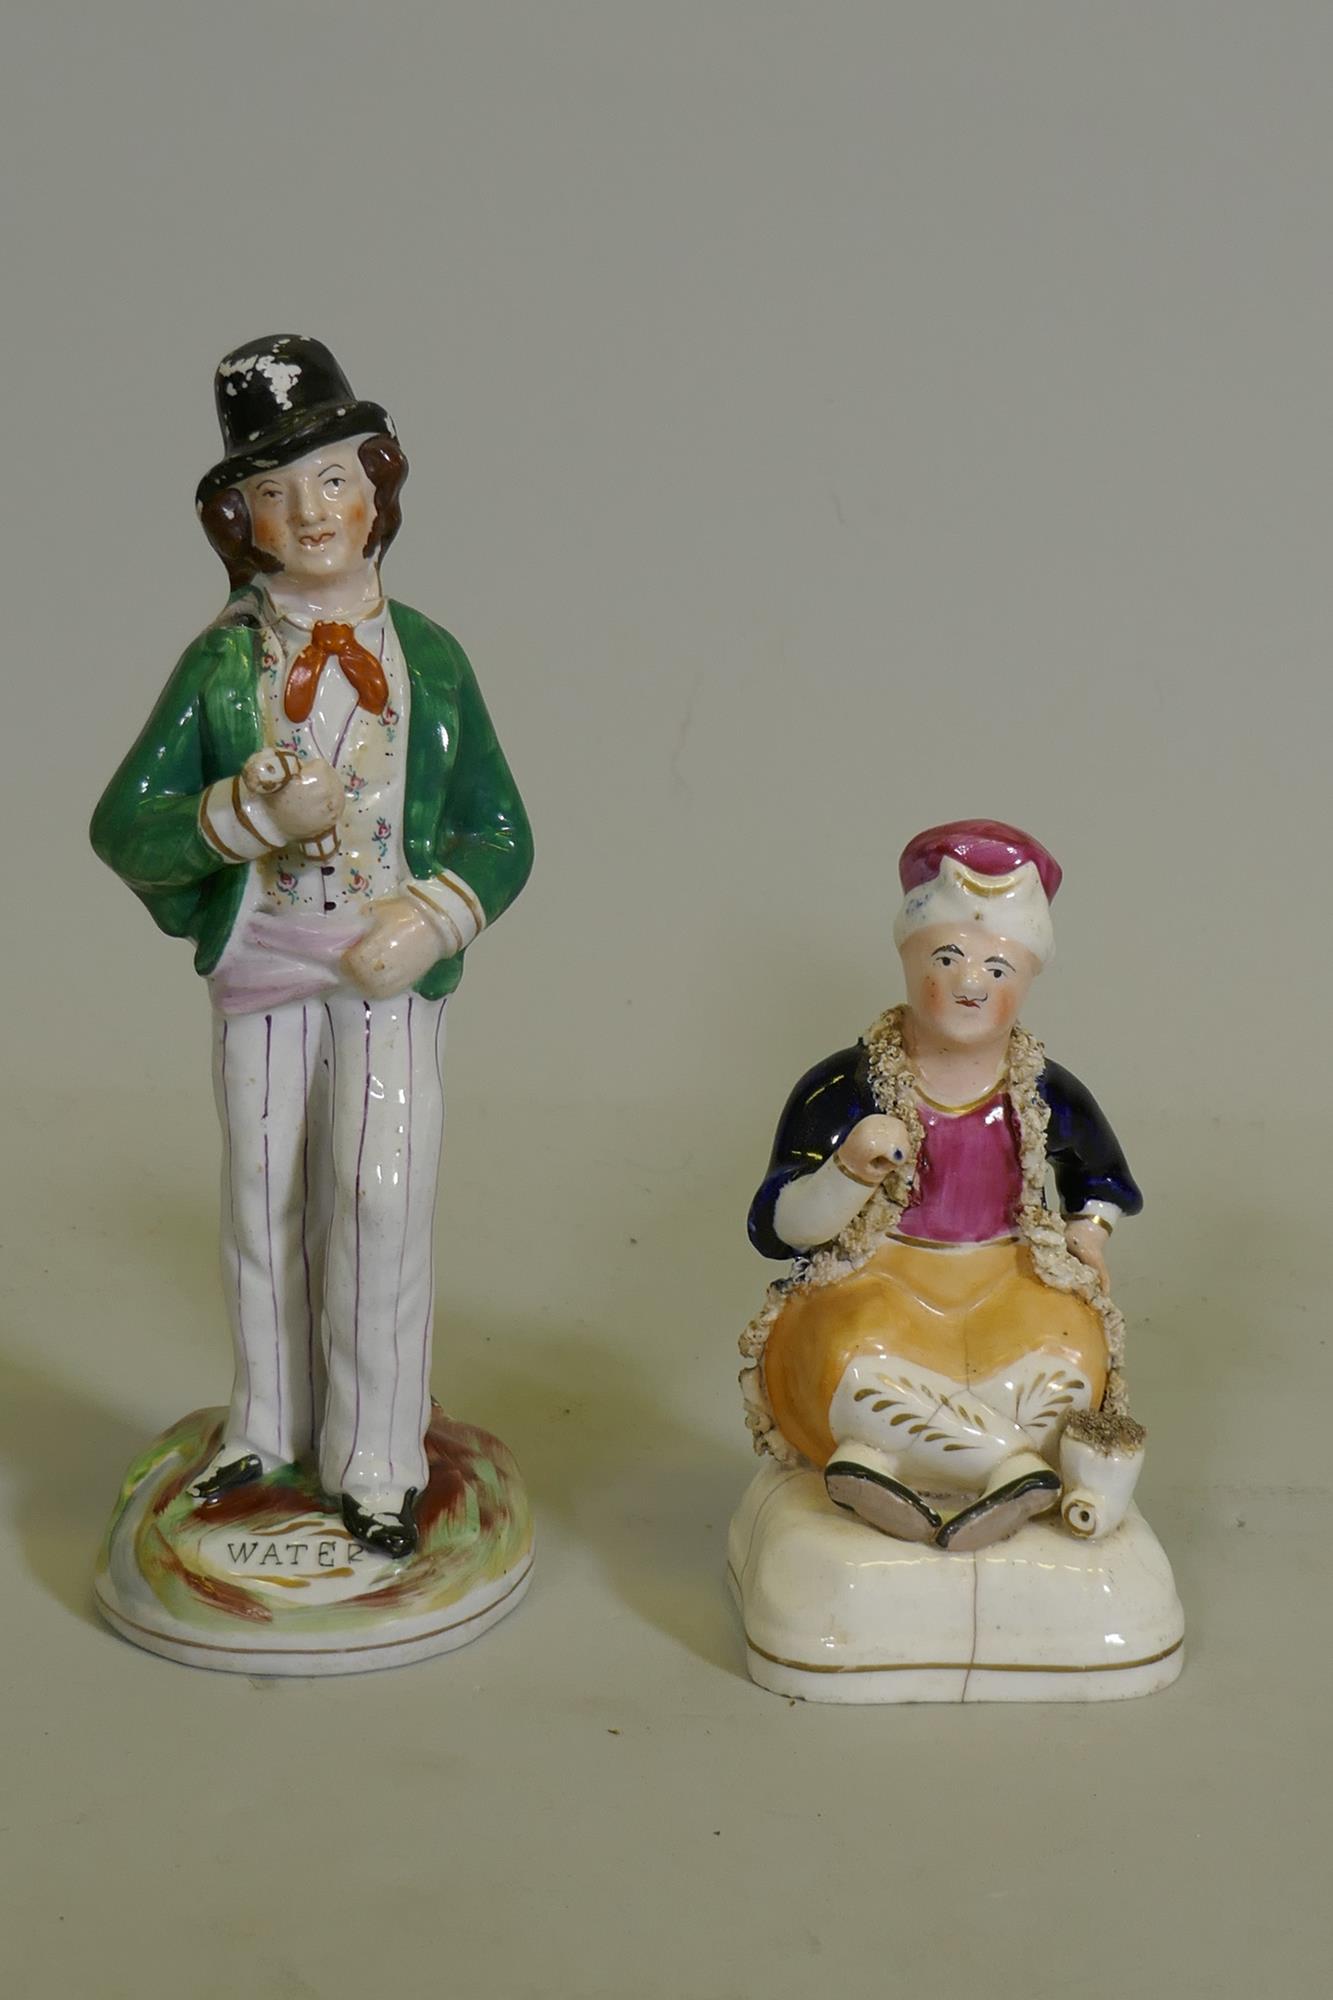 A C19th Staffordshire temperance double sided figure of a Gin and Water drinker, 22cm high, and